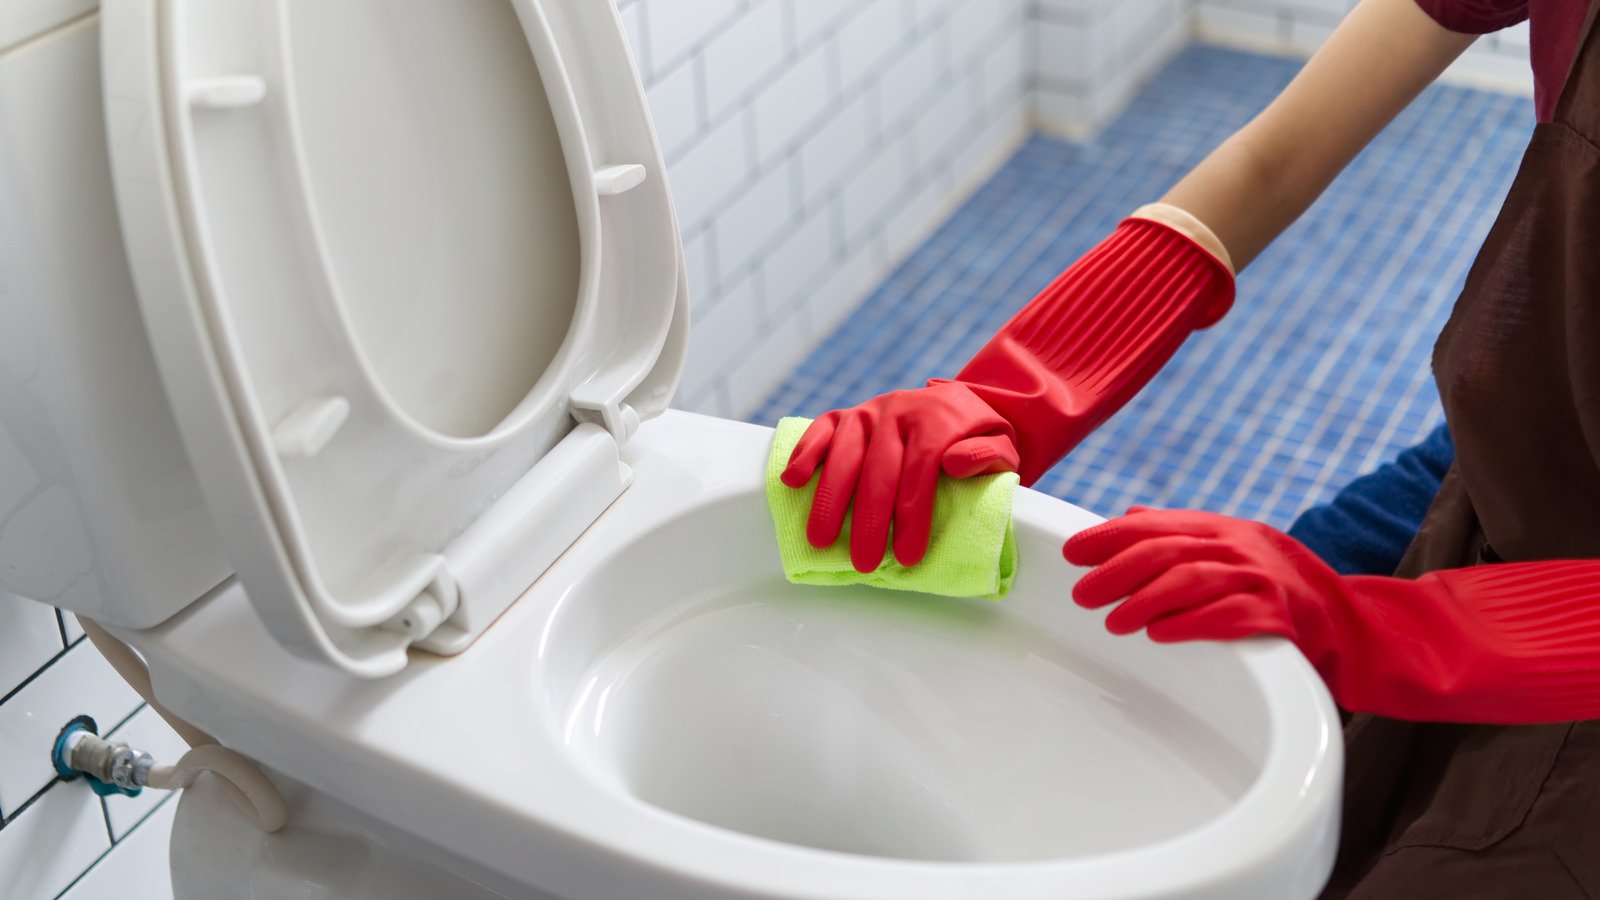 https://www.housedigest.com/img/gallery/the-best-way-to-clean-behind-your-toilet/l-intro-1654877141.jpg